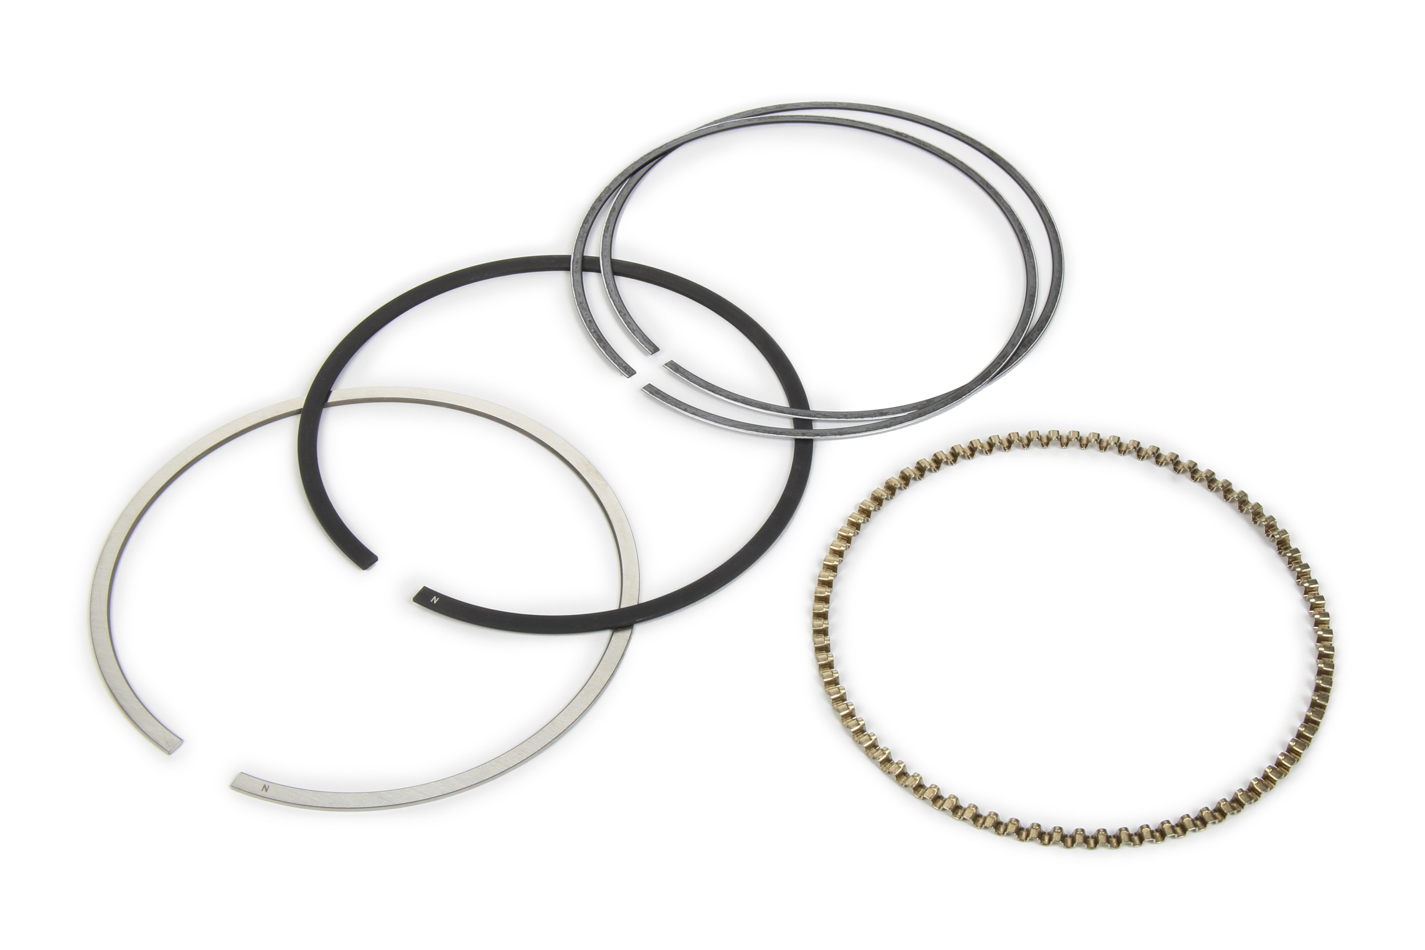 Wiseco Pistons 4007GFX Piston Rings, GF-Style, 4.000 in Bore, File Fit, 0.047 in x 0.047 in x 3.0 mm Thick, Standard Tension, Steel, Gas Nitride, 1-Cylinder, Each